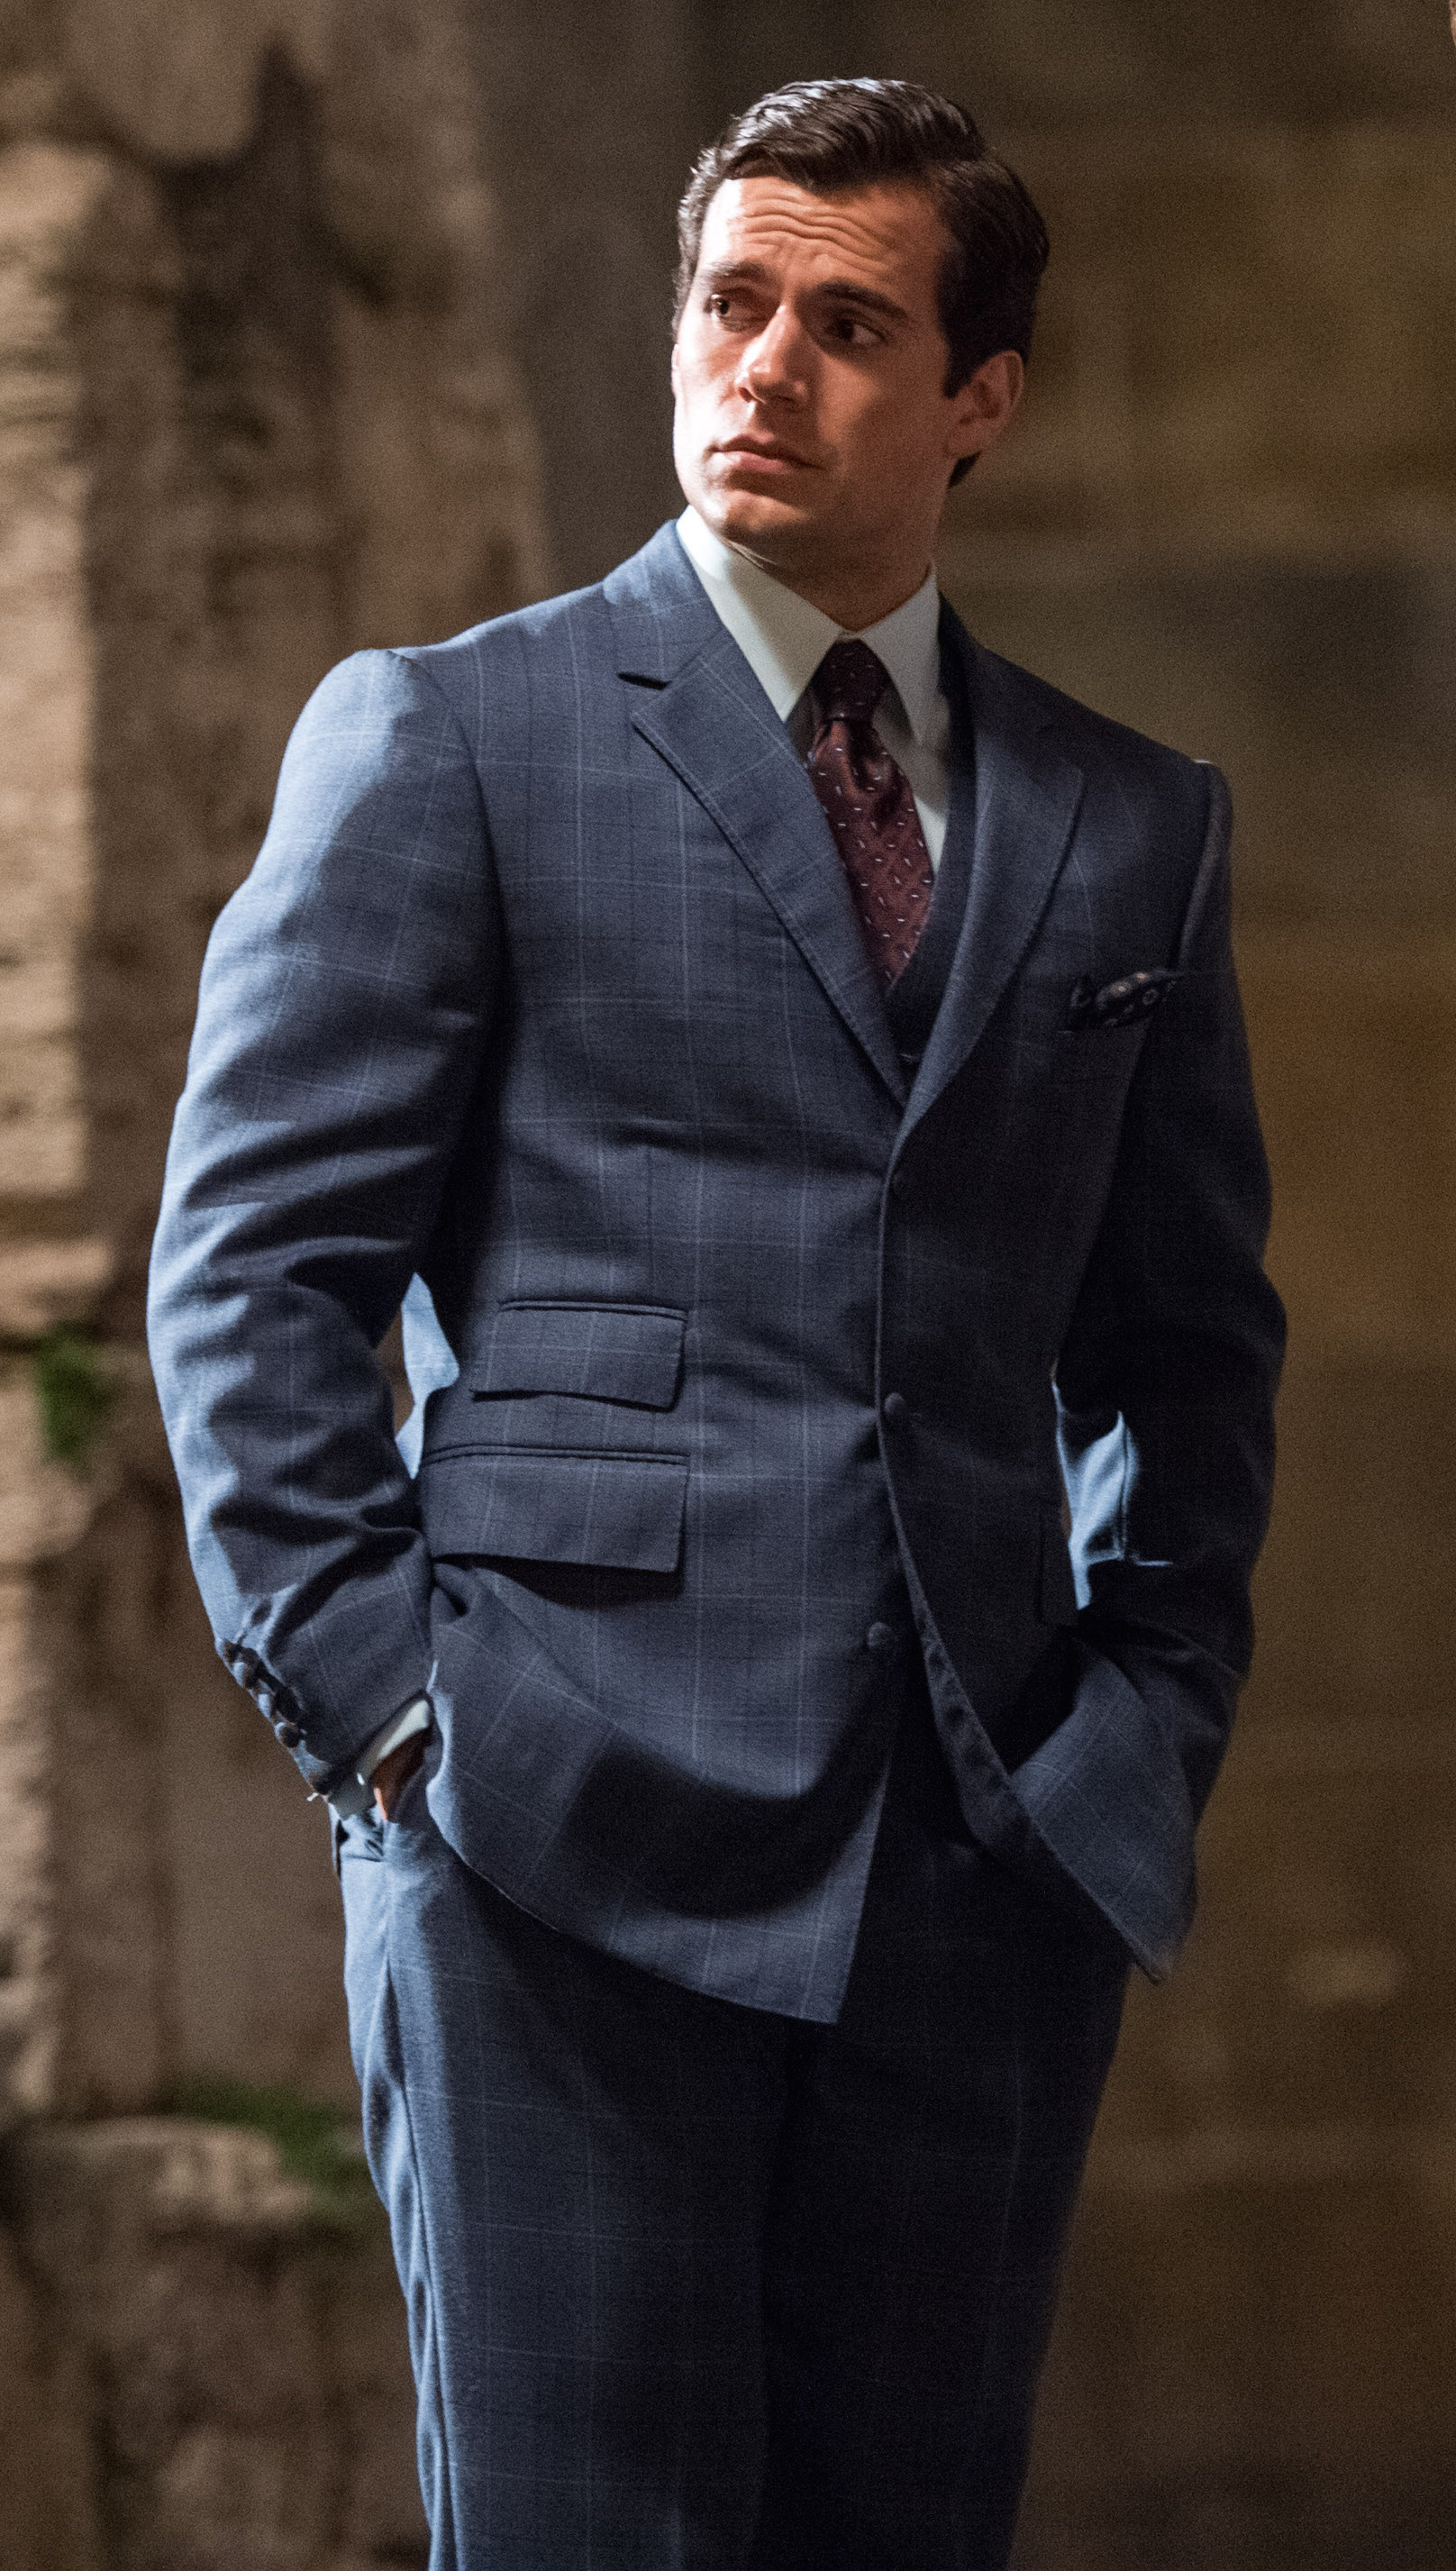 The Man from U.N.C.L.E. (2015) – Solo's Blue Teal Windowpane Suit ...